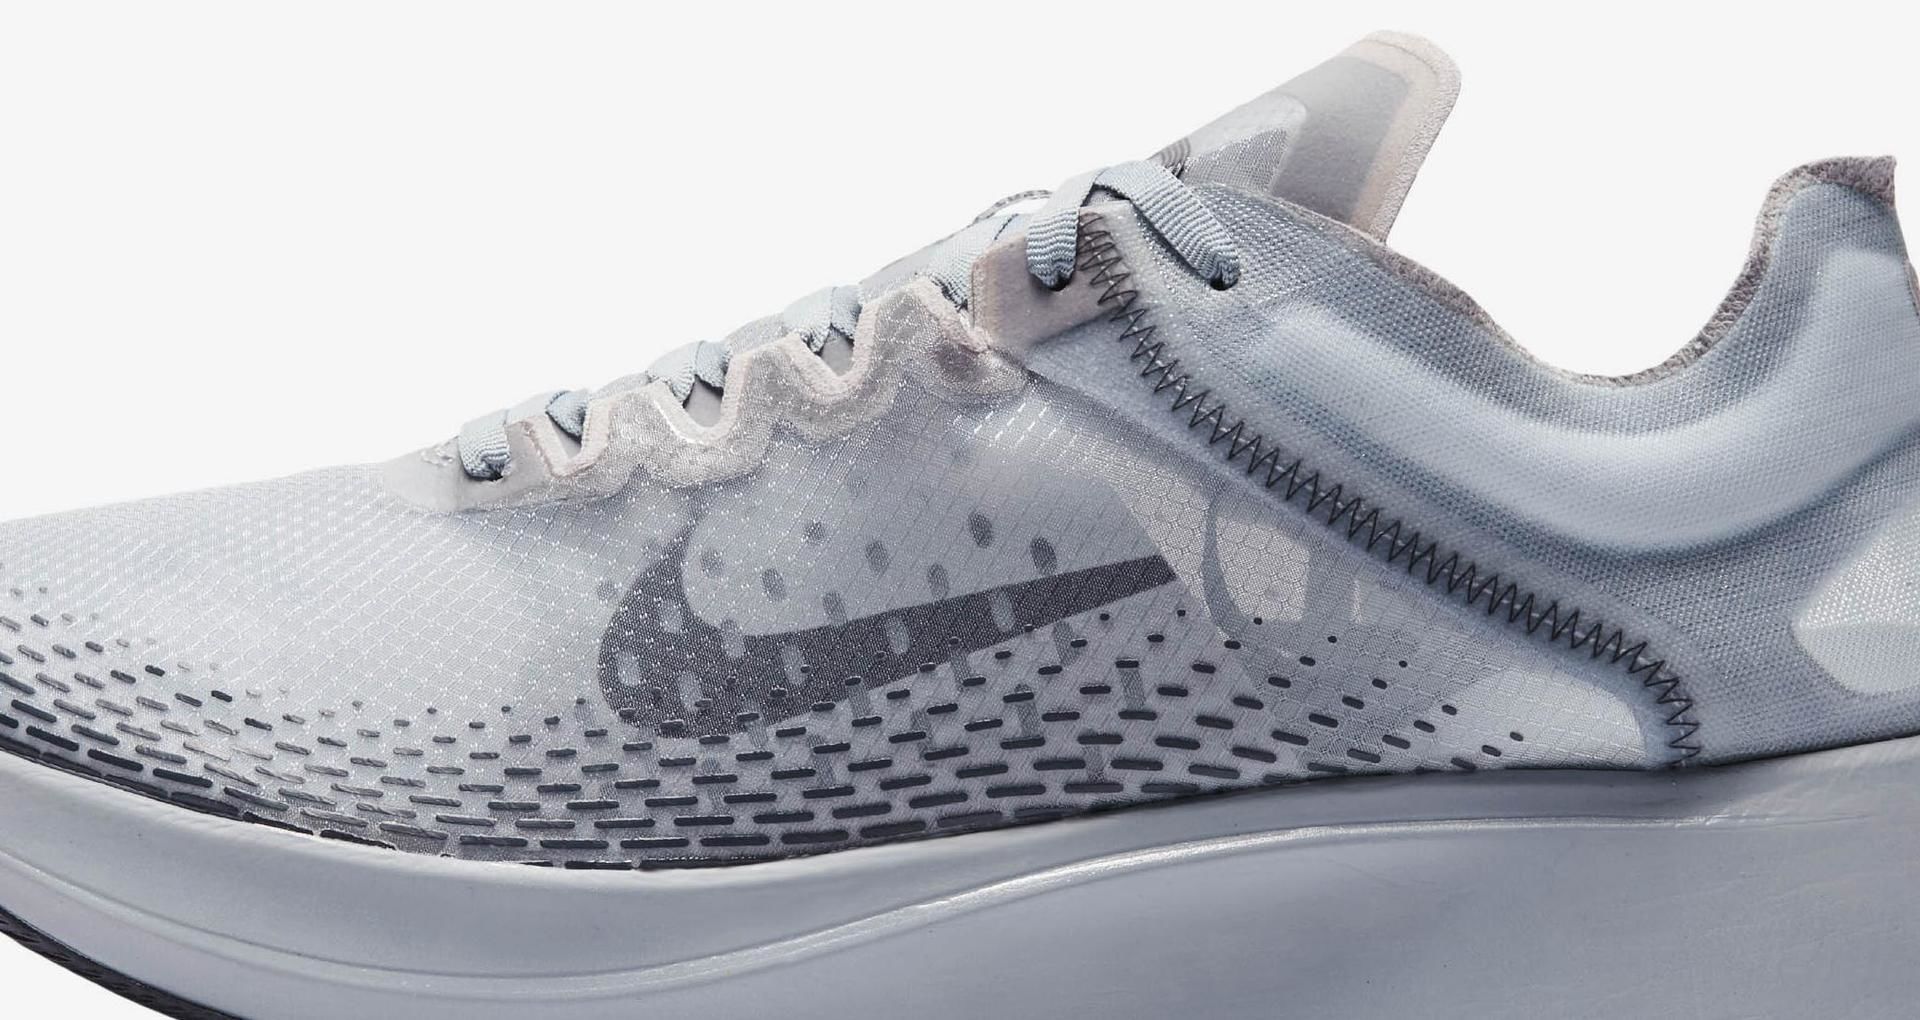 08-nike-zoom-fly-sp-fast-obsidian-mist-at5242-440